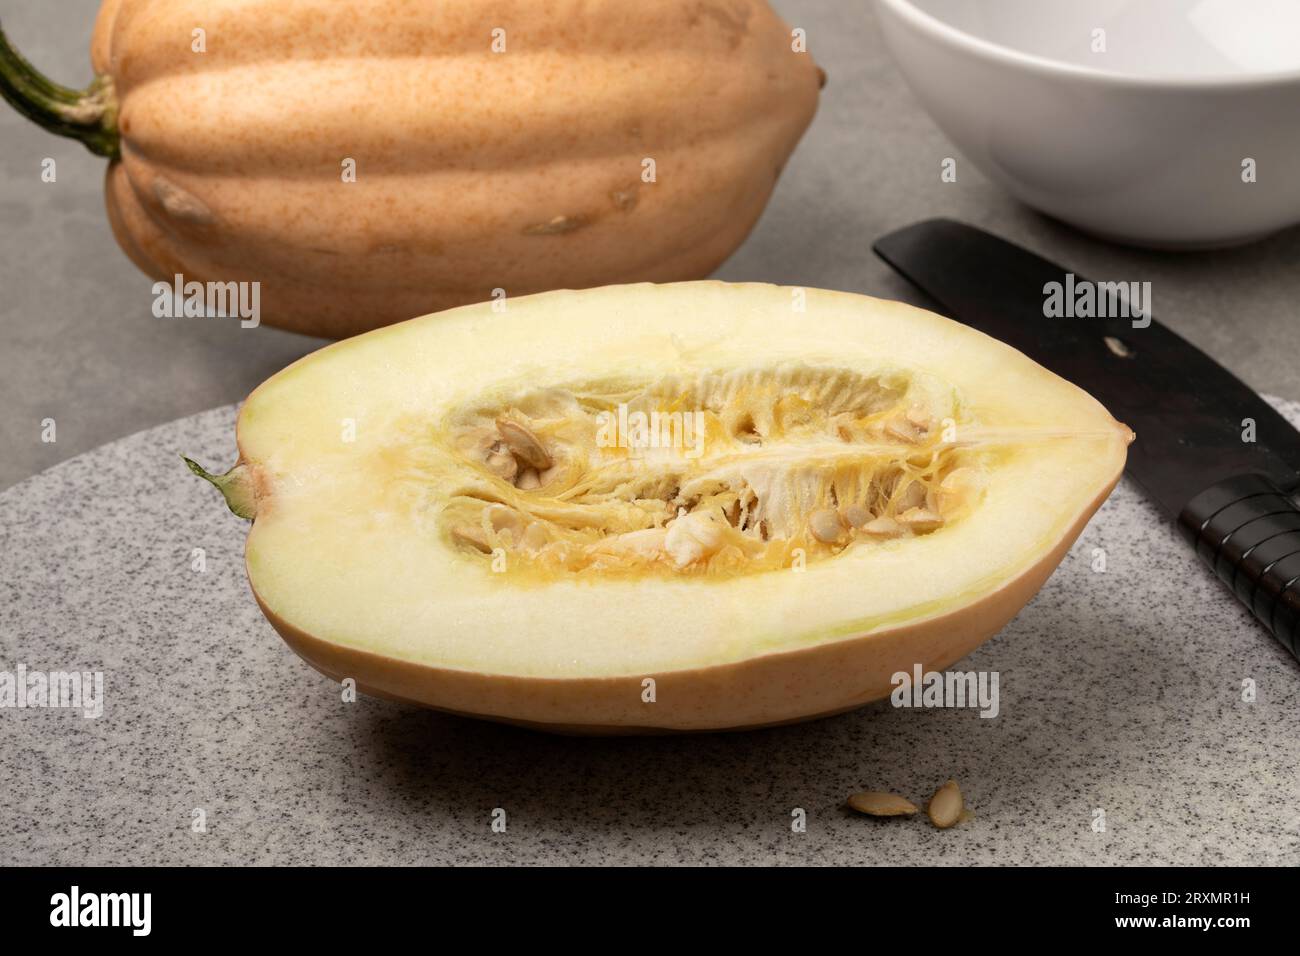 Whole and halved fresh Baked potato Acorn Squash on a cutting board close up Stock Photo